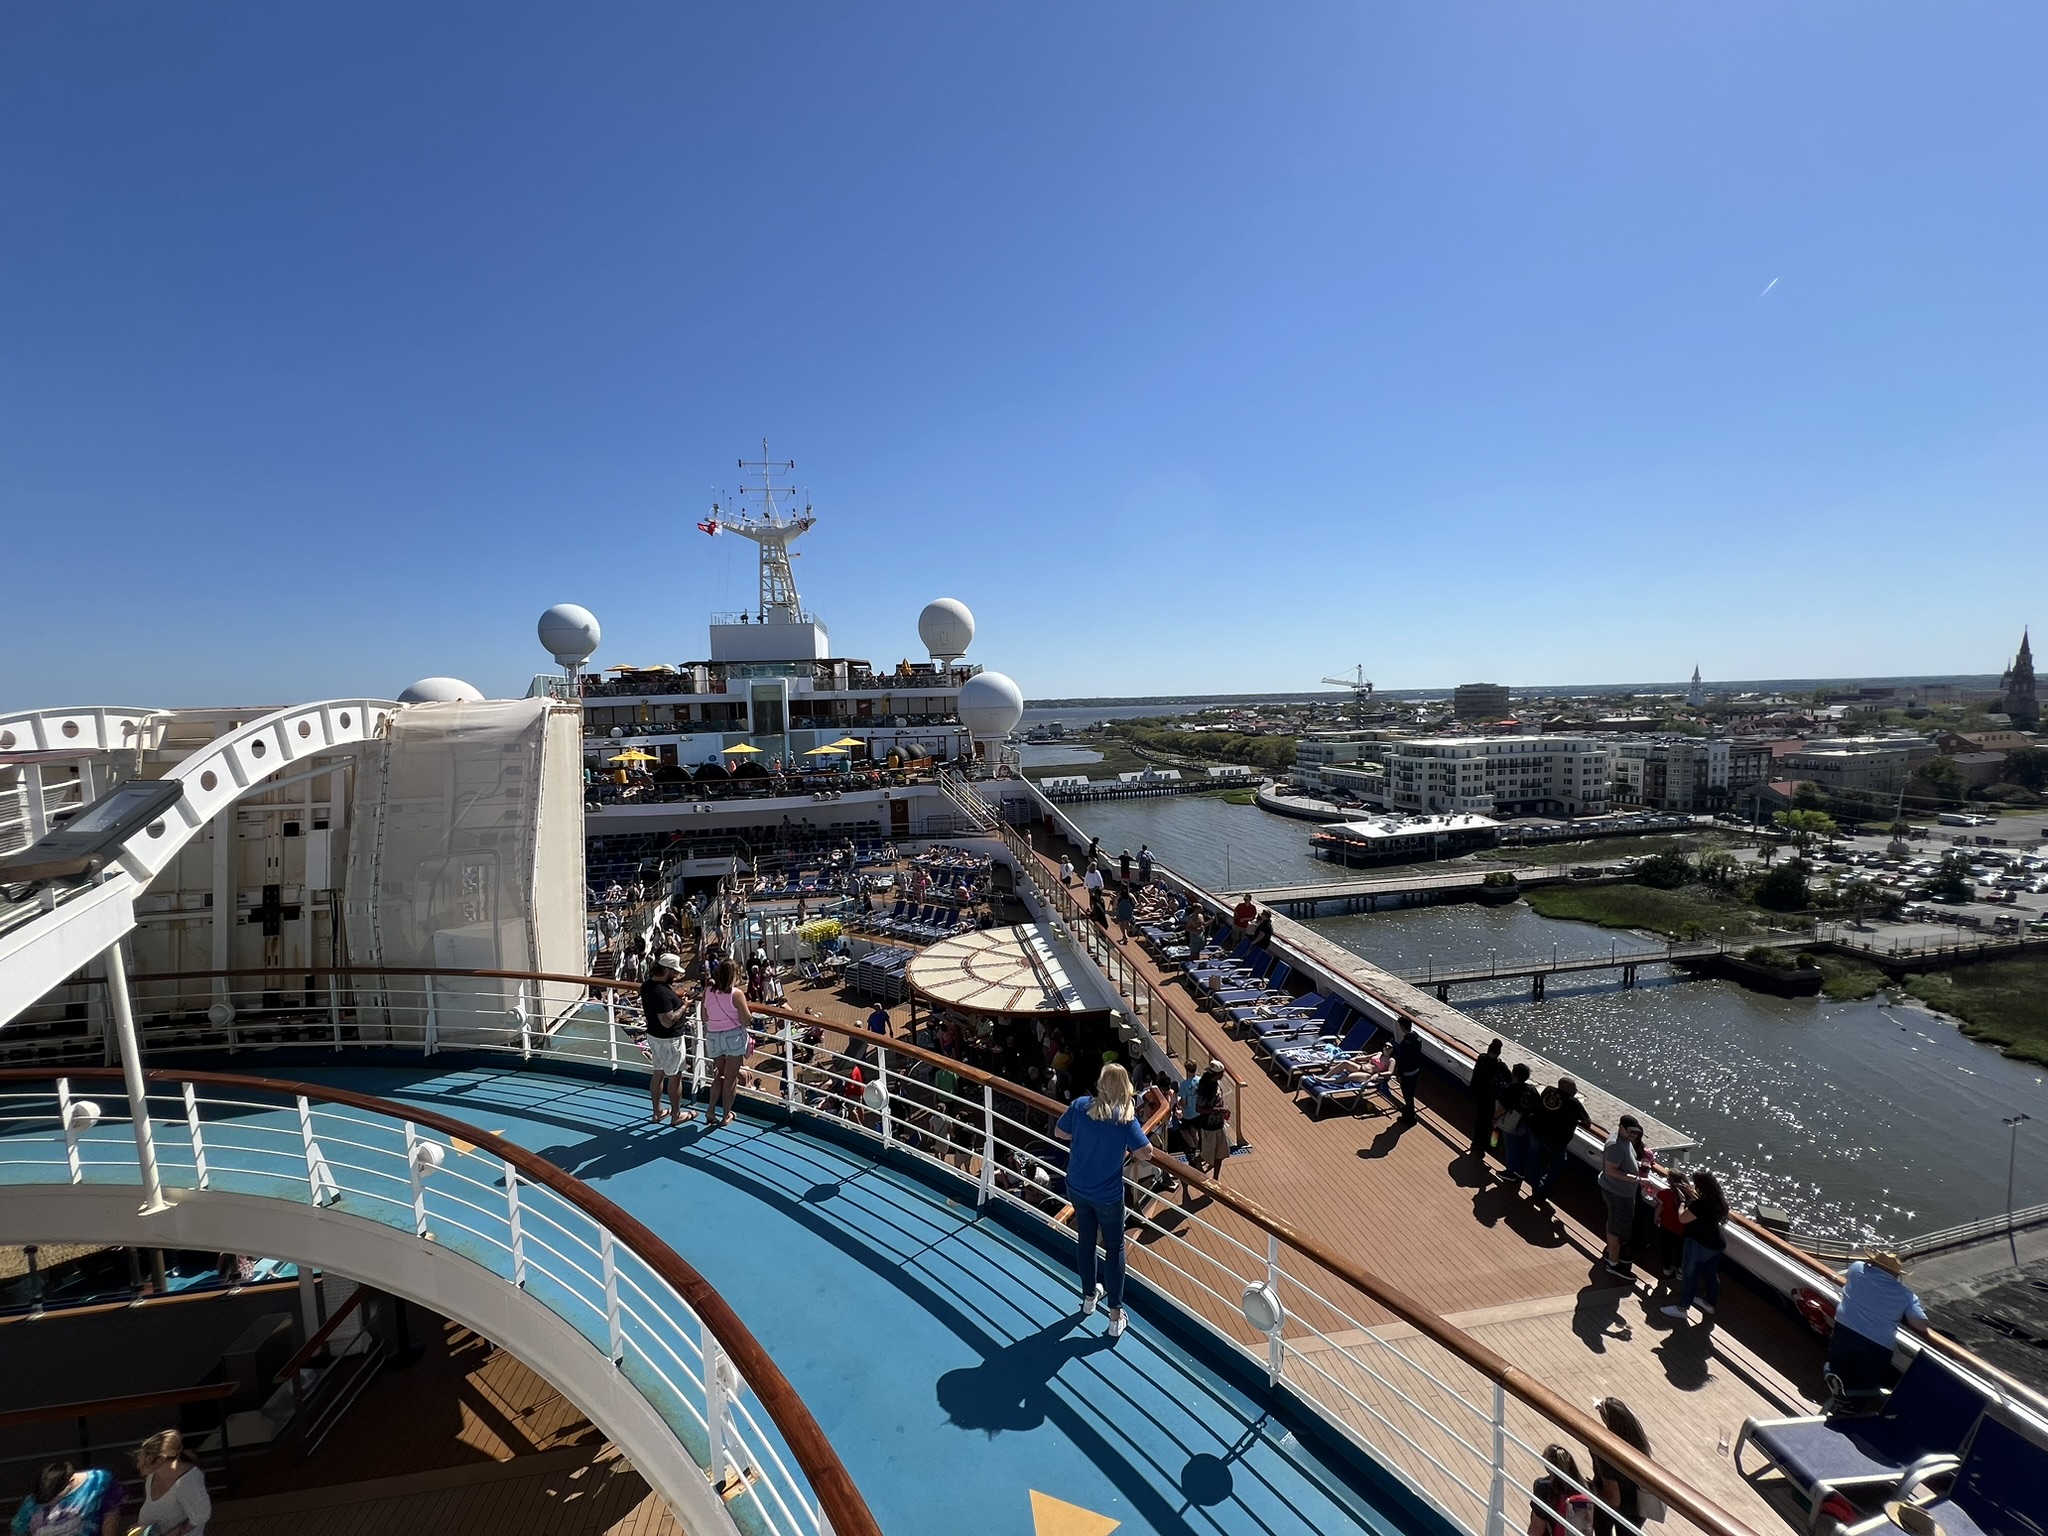 Cruise Ports - Carnival Sunshine Leaving the Port of Charleston for a 5-day Bahamas Cruise